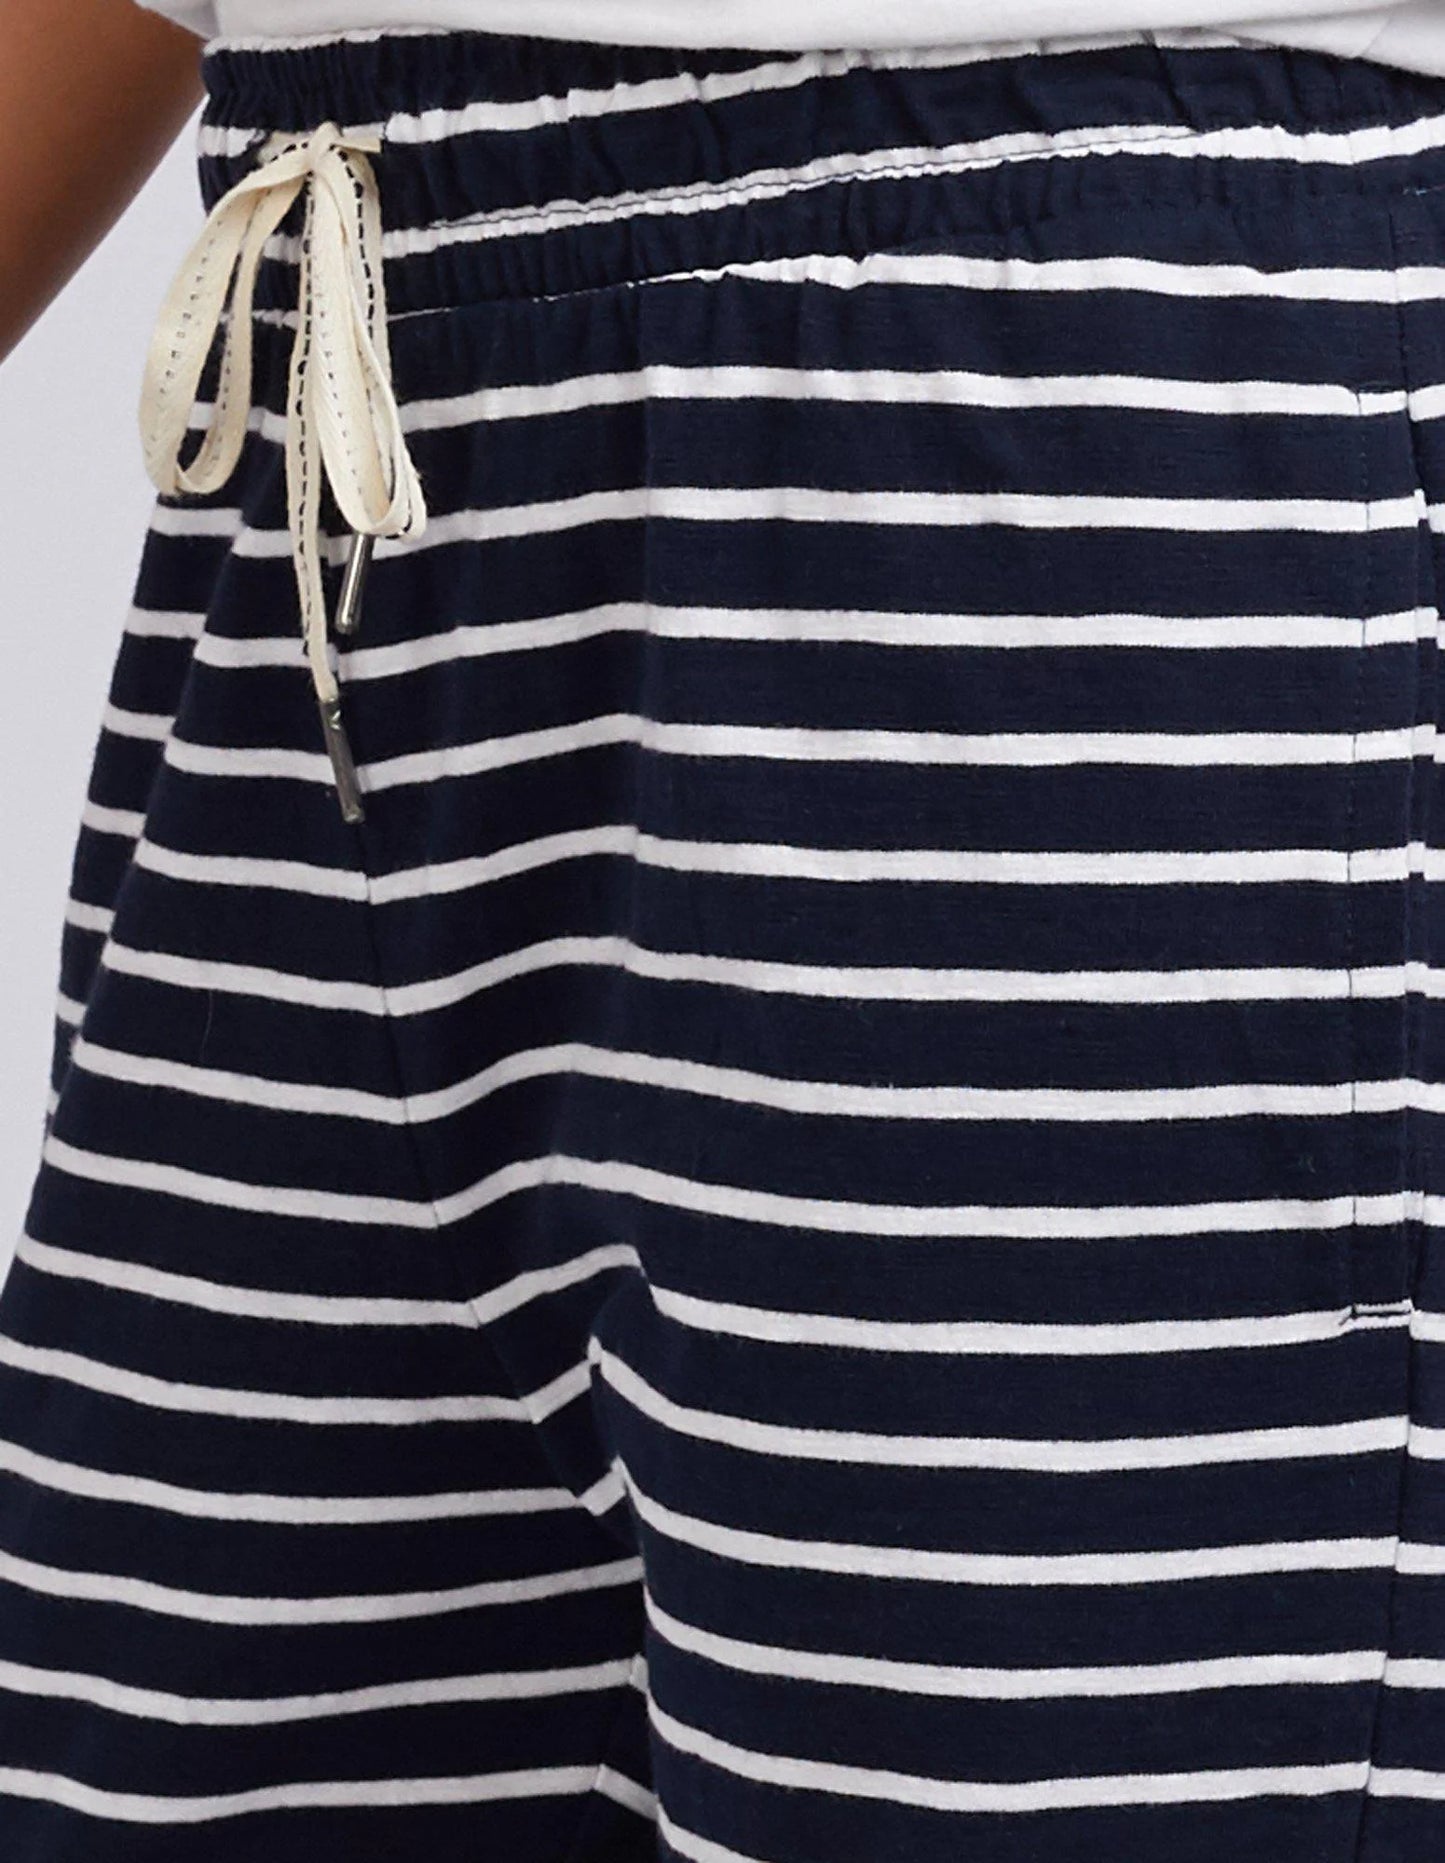 Navy and White Stripe Brunch Pant